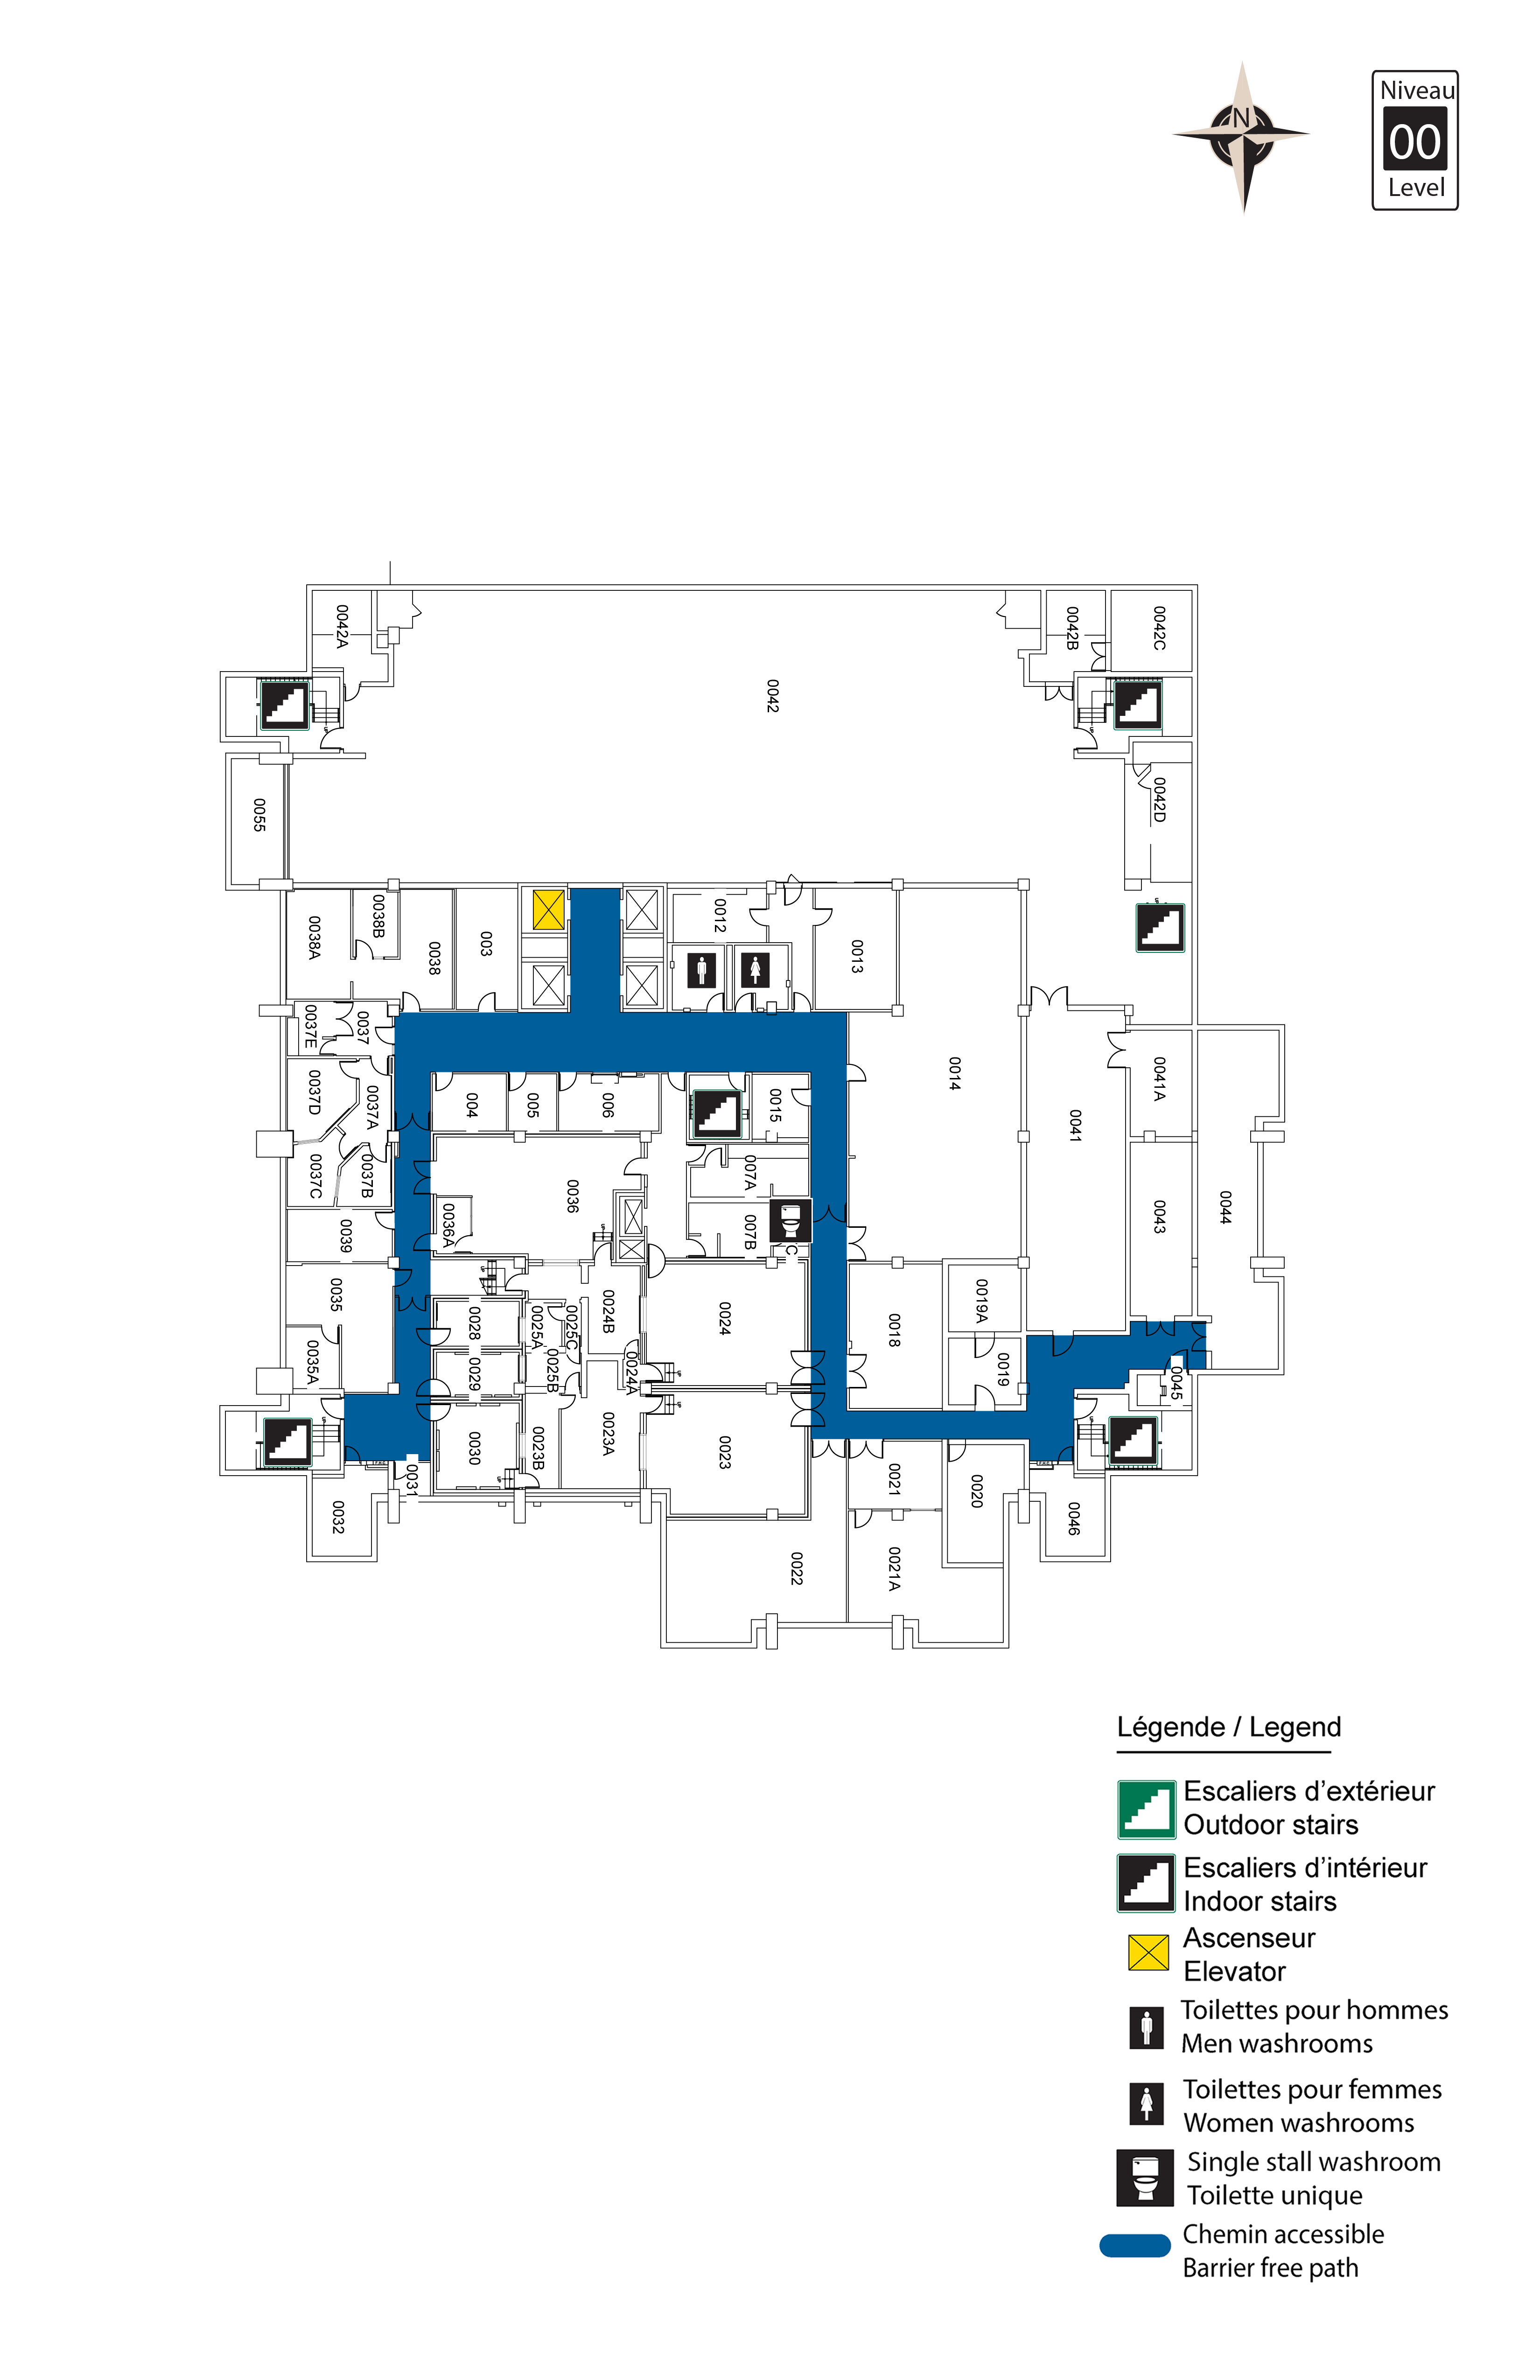 Accessible map of Morisset level 00